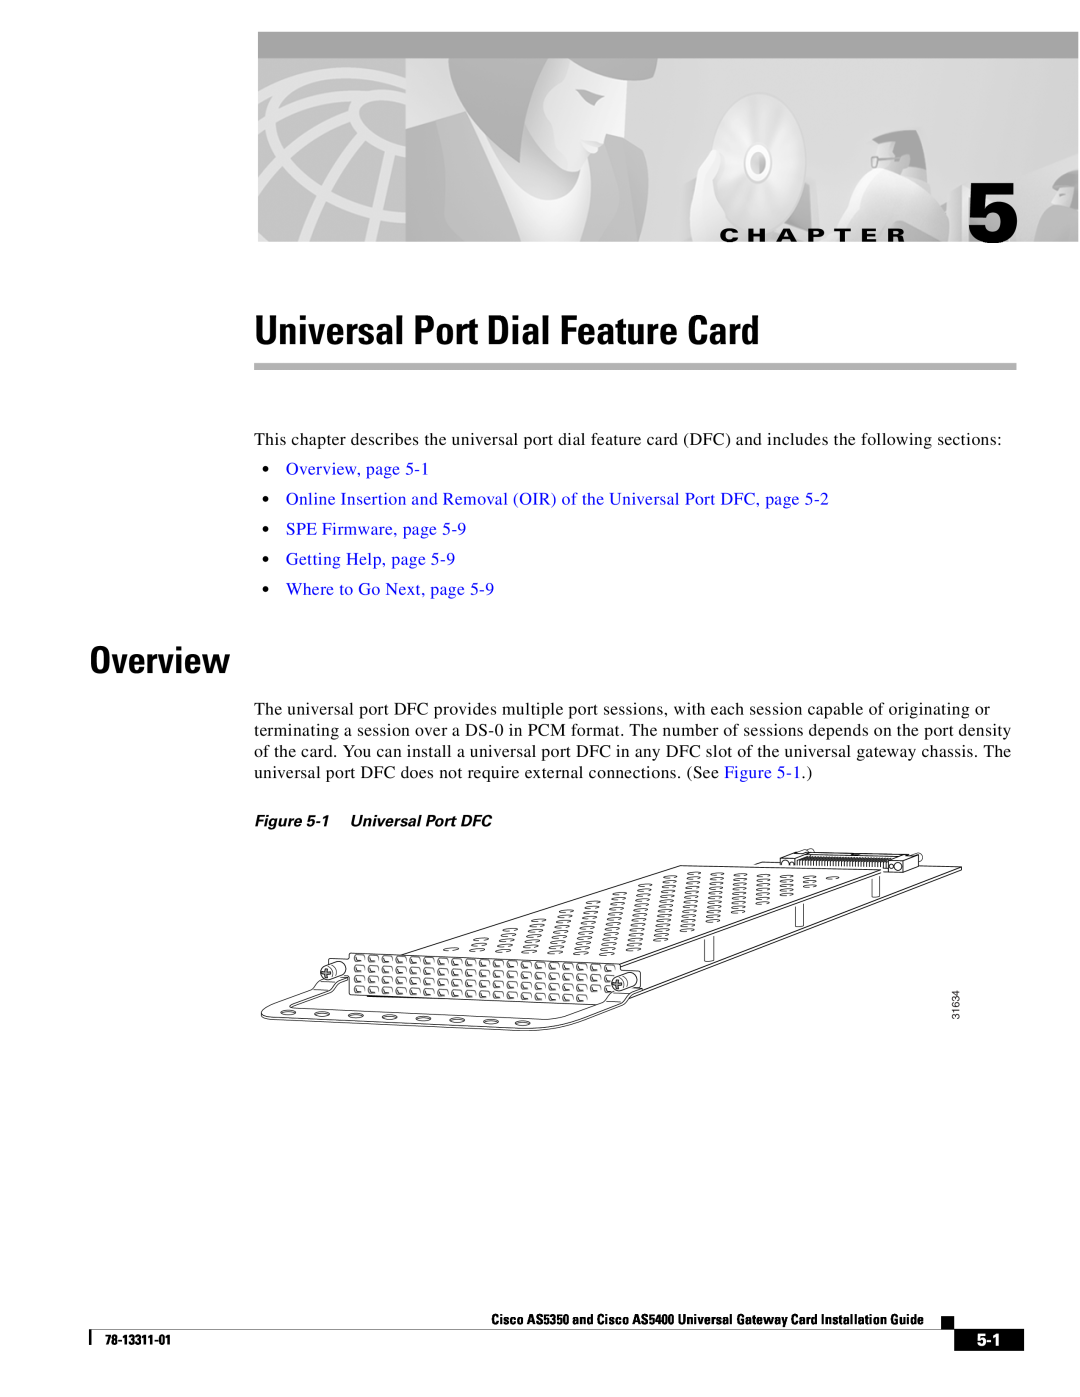 Cisco Systems AS5350 Universal Port Dial Feature Card, Online Insertion and Removal OIR of the Universal Port DFC, page 